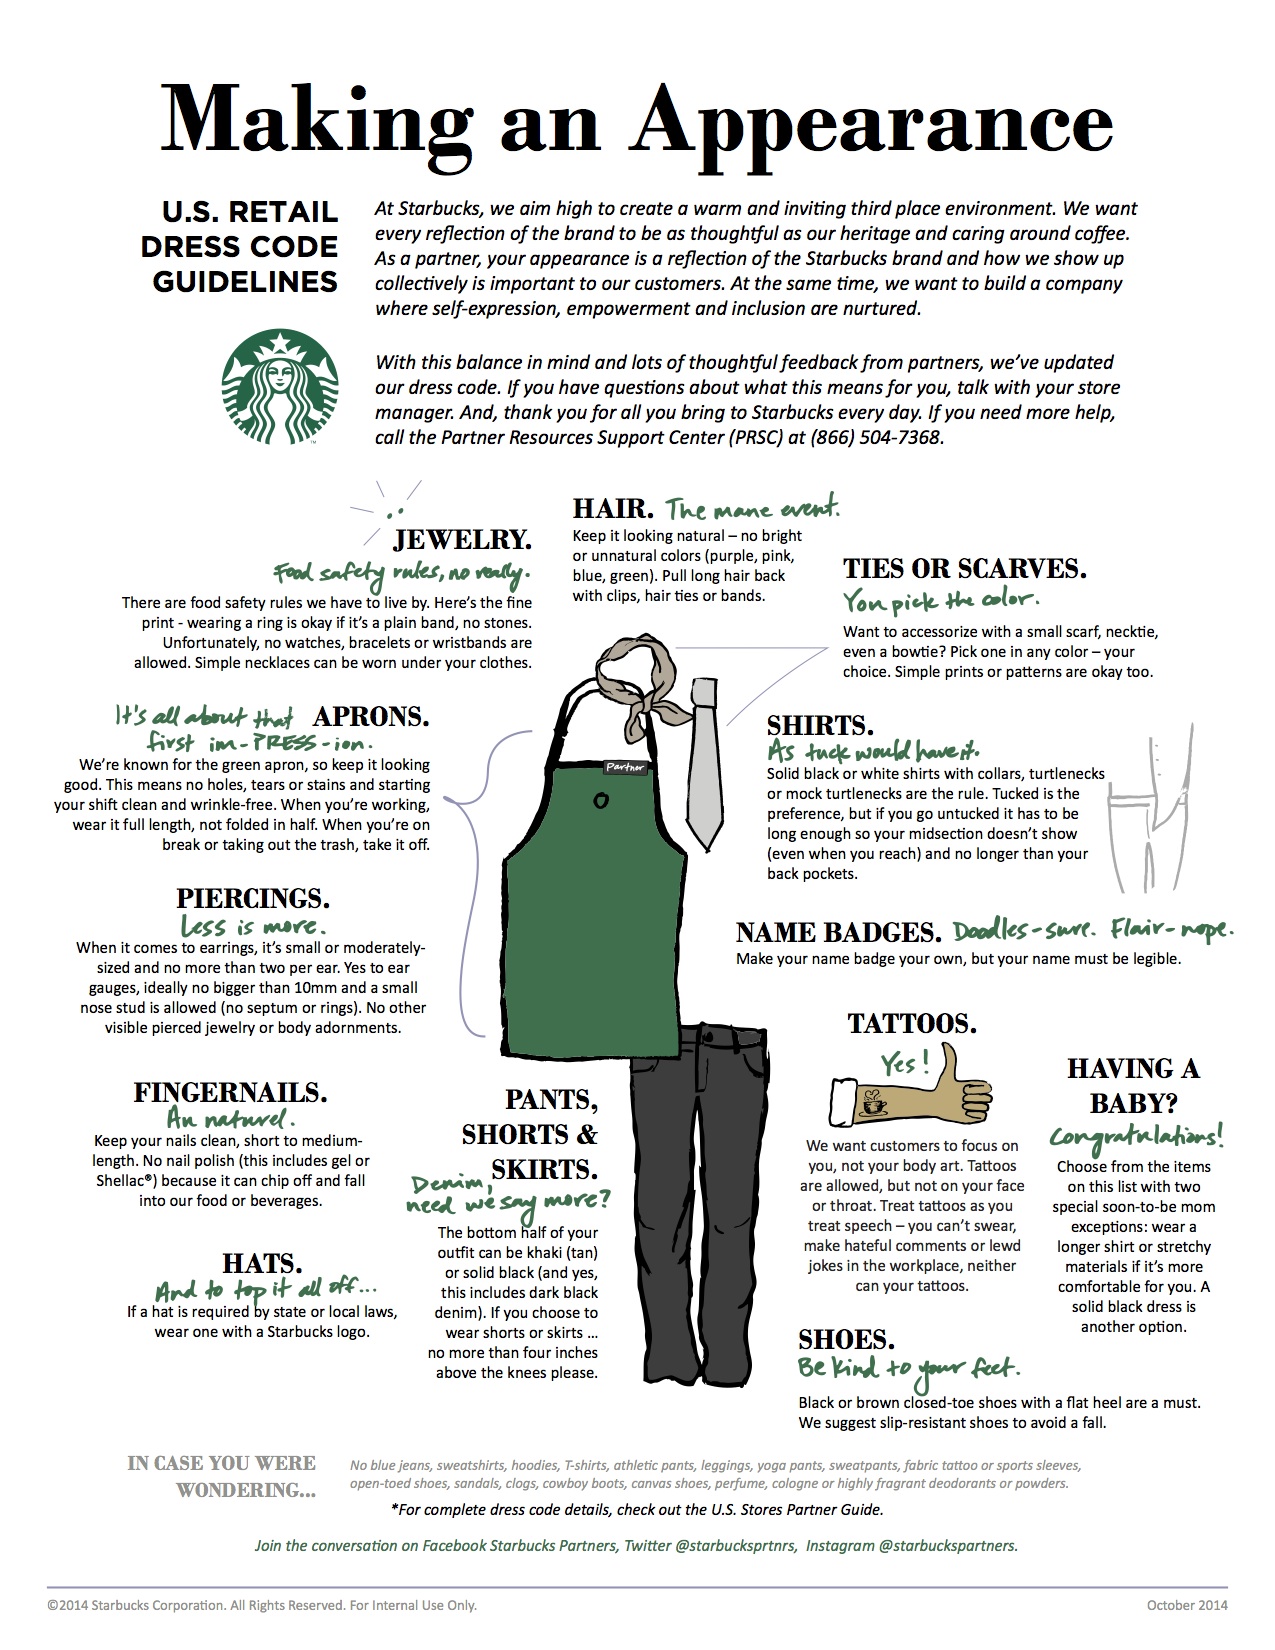 Get Ready To Show That Ink, Baristas Starbucks Changes Policy To Allow